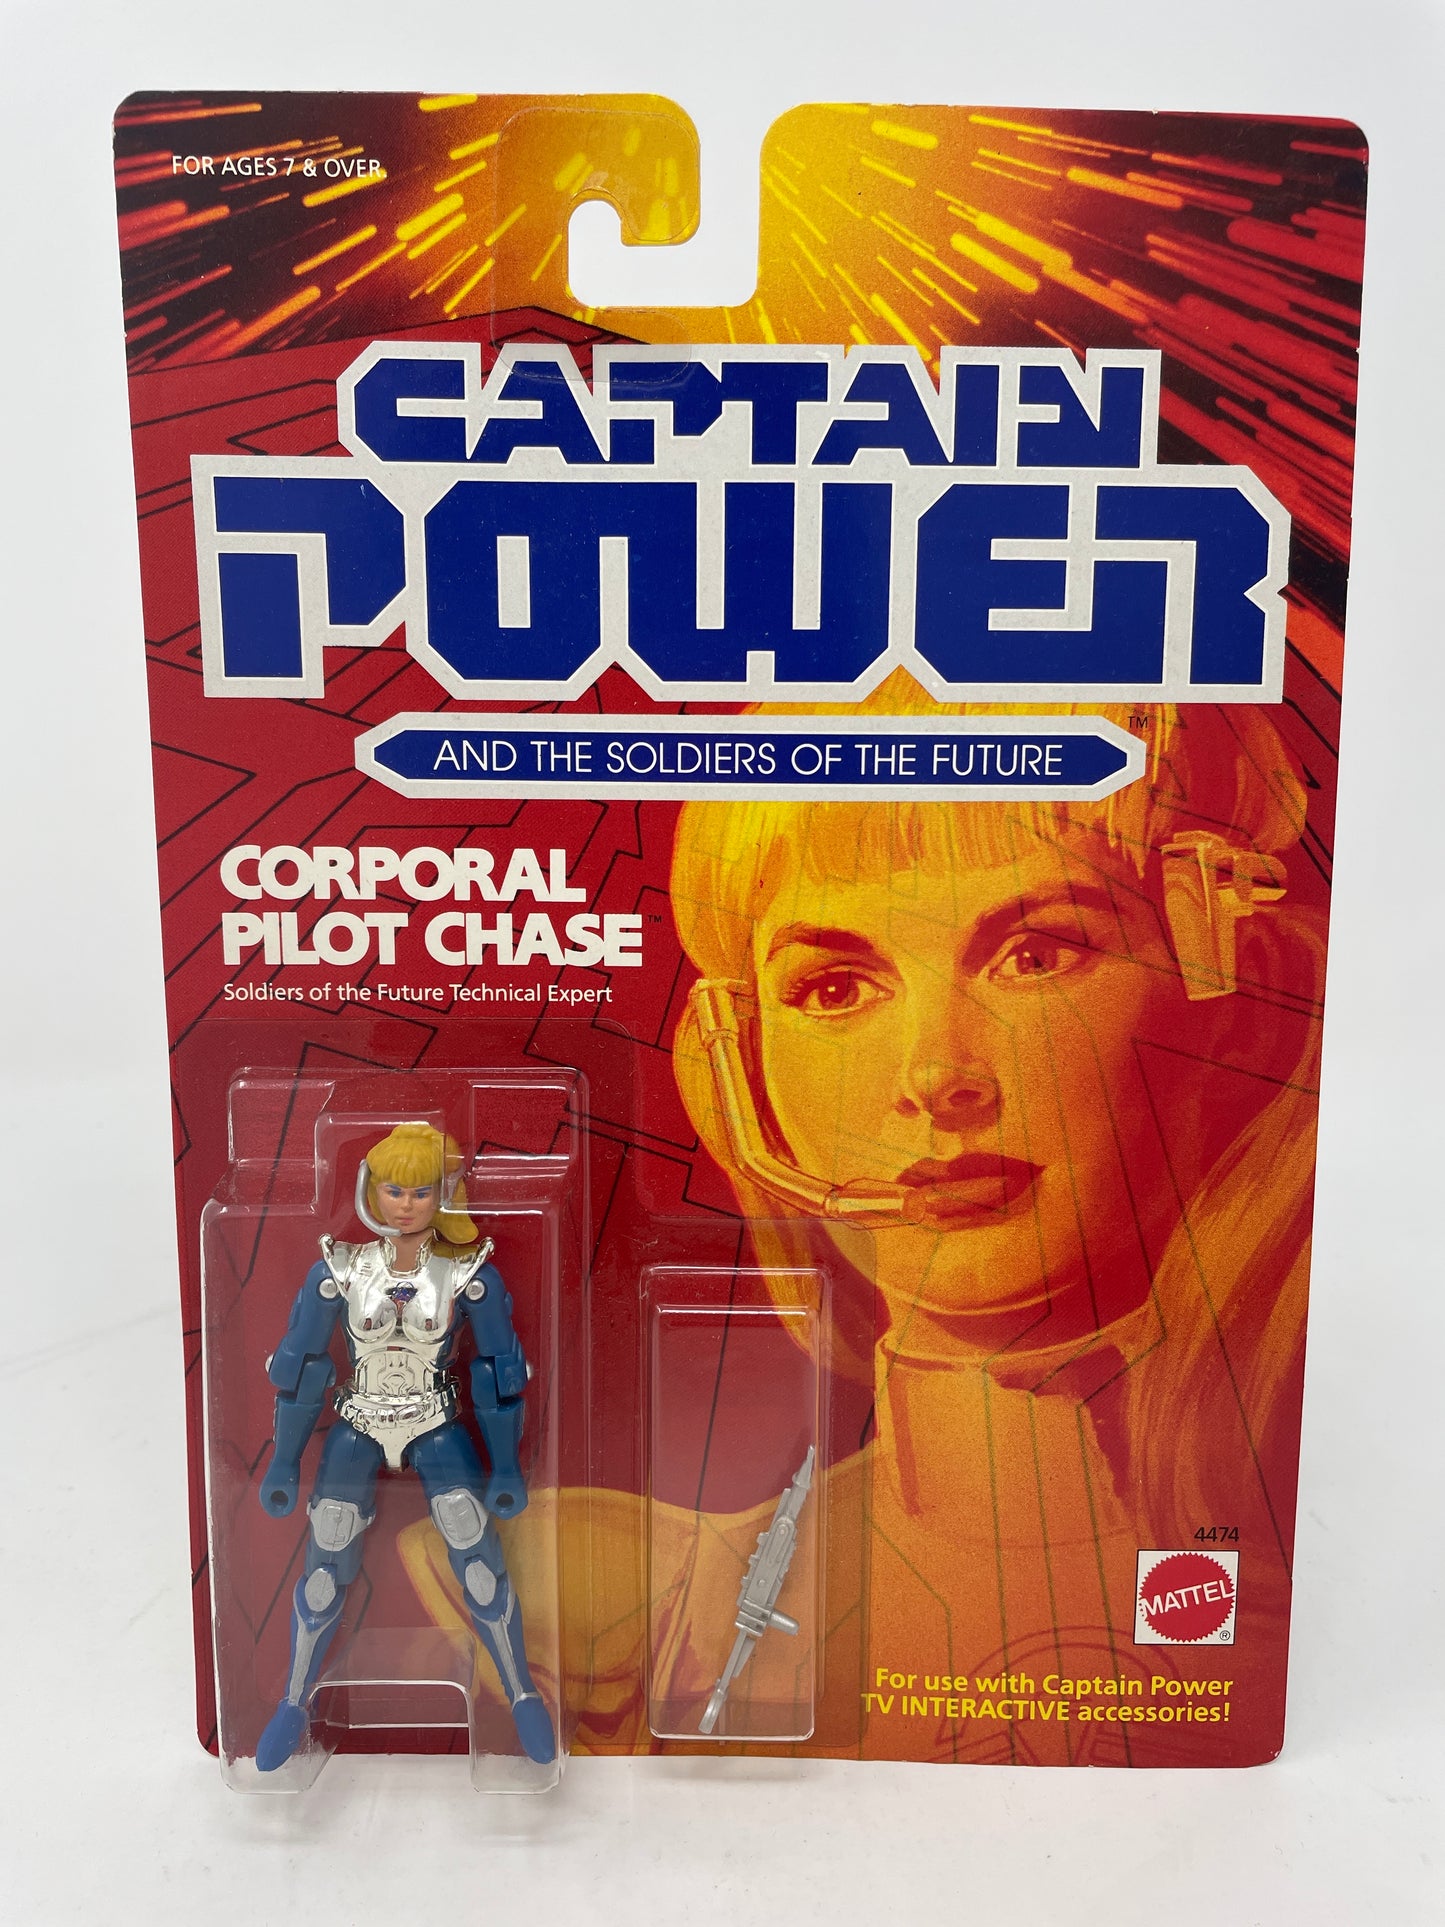 CORPORAL PILOT CHASE - CAPTAIN POWER AND THE SOLDIERS OF THE FUTURE - #4474 - MATTEL 1987 (2 OF 2)